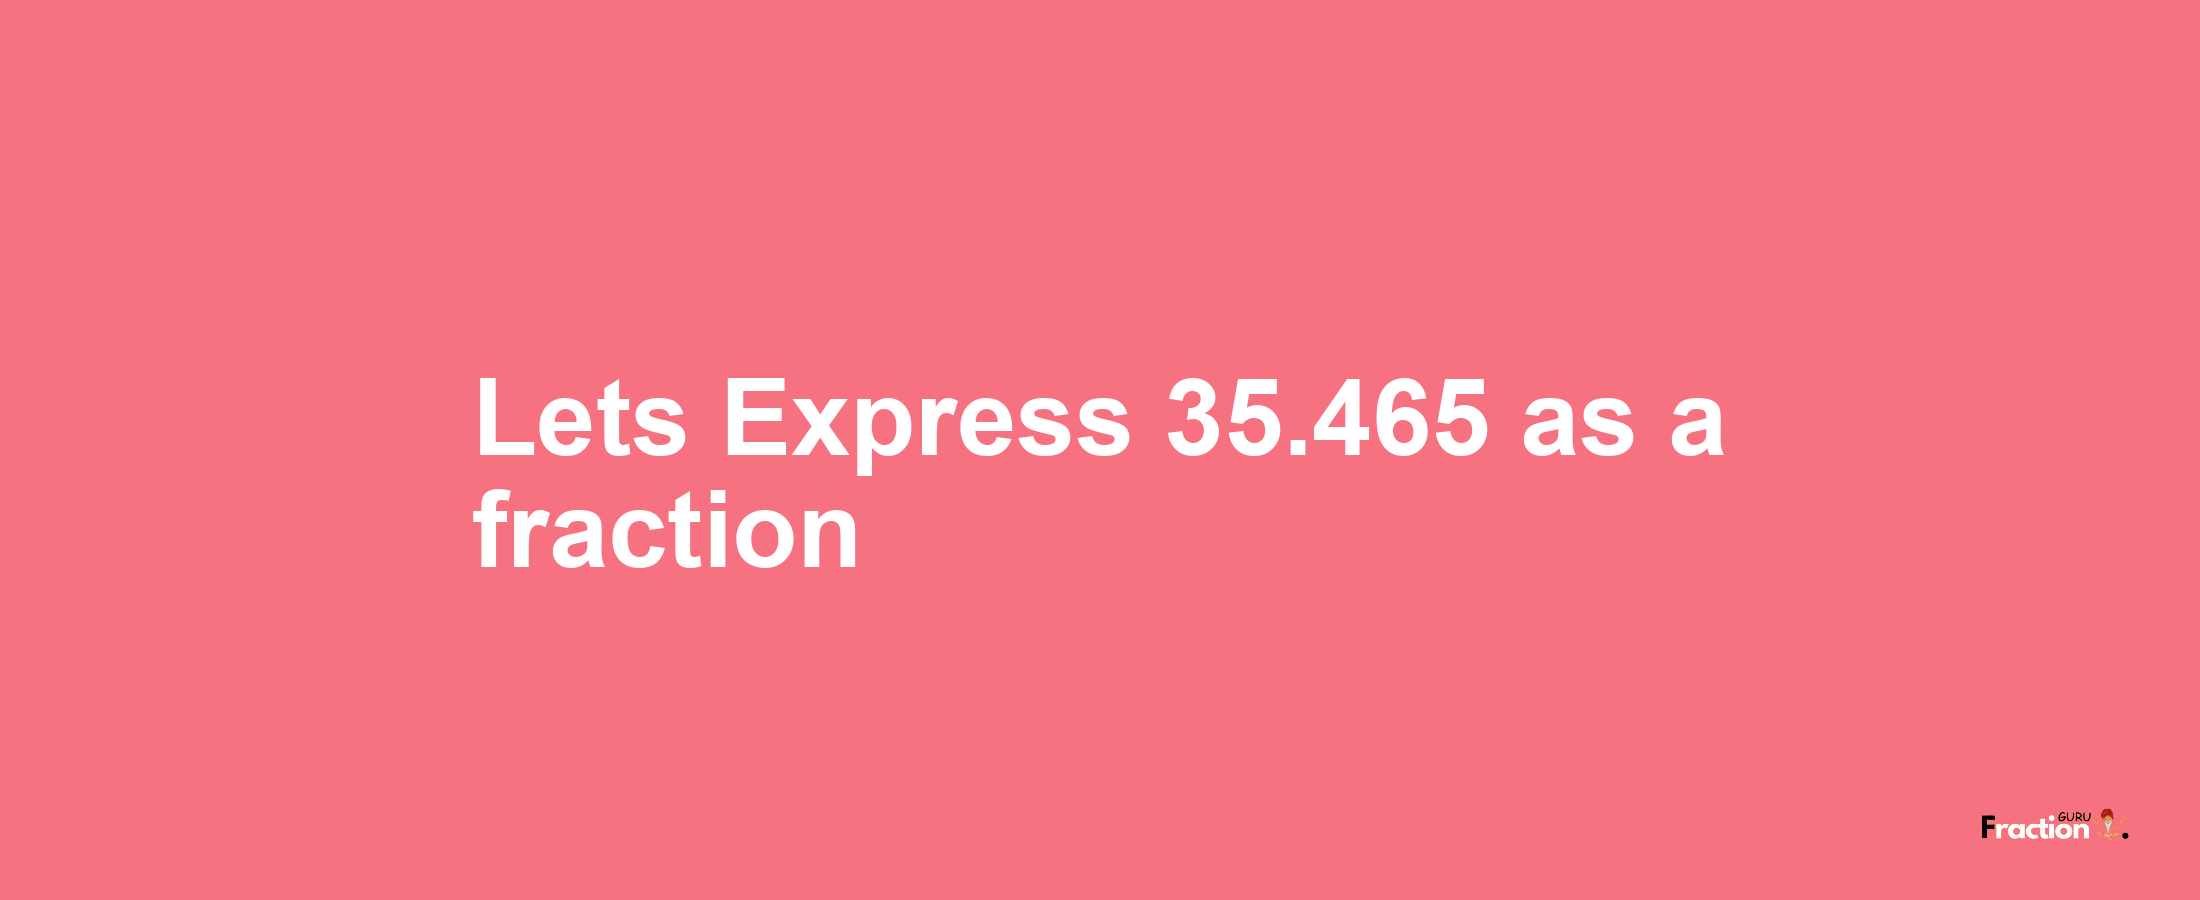 Lets Express 35.465 as afraction